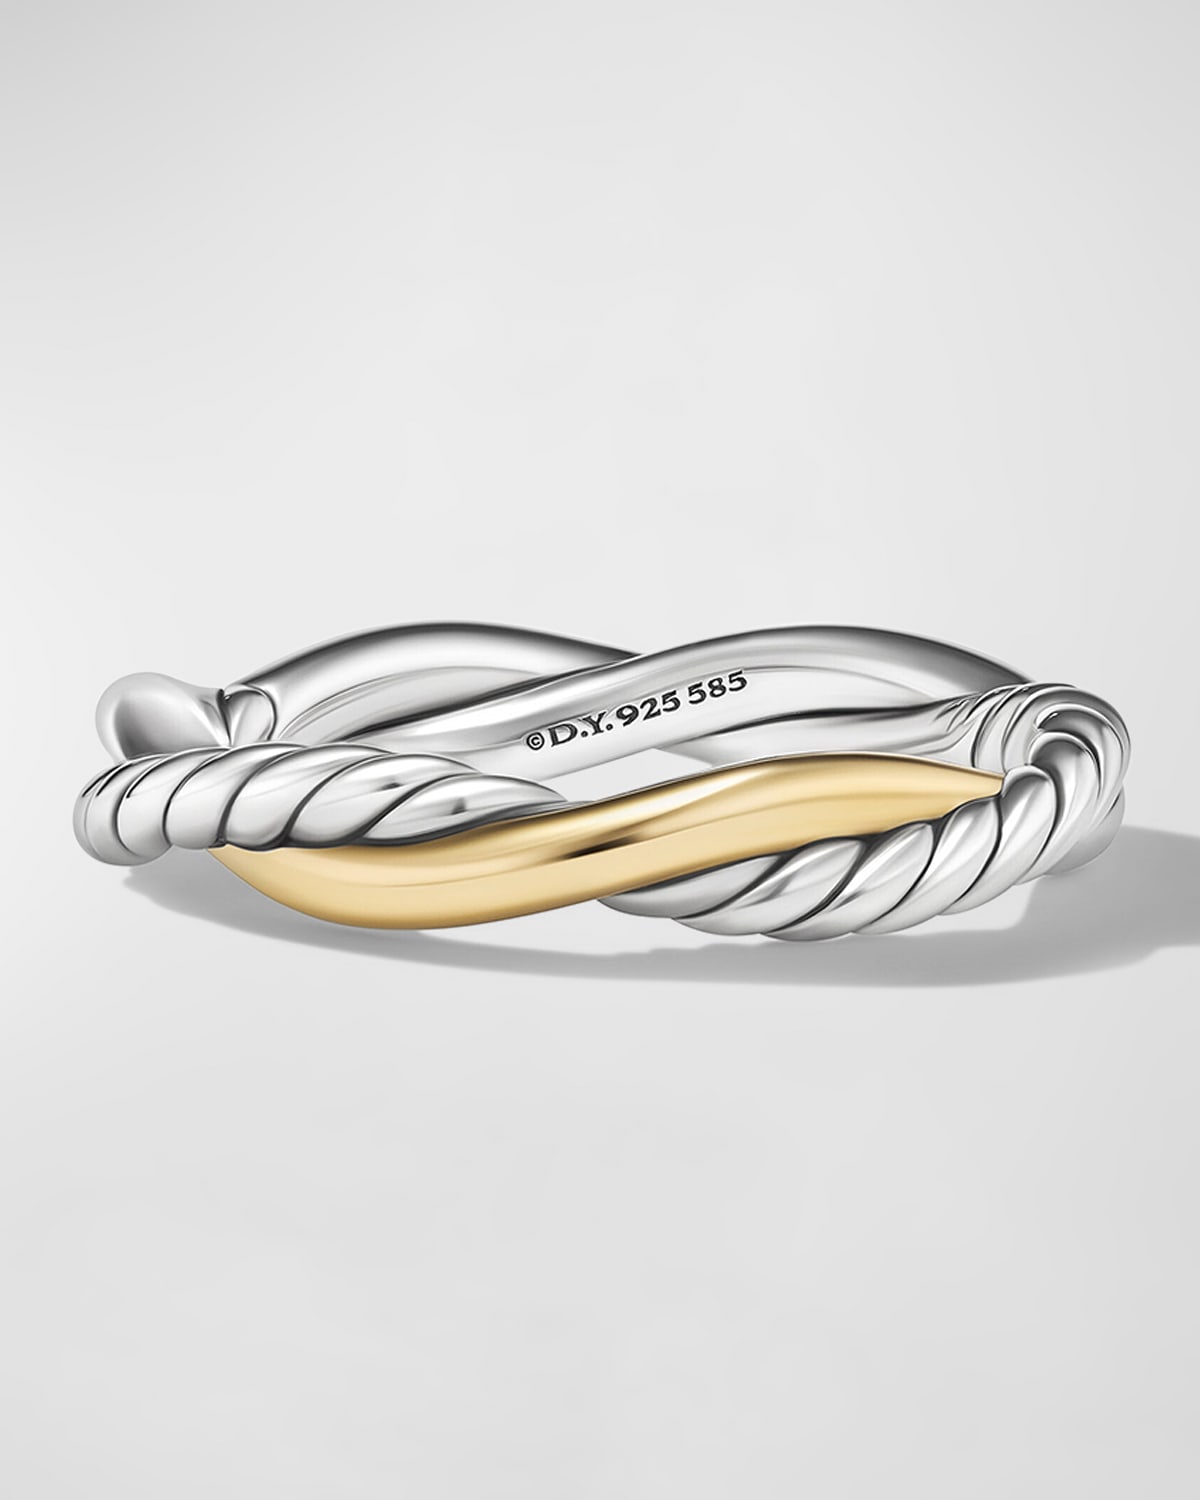 David Yurman Petite Infinity Band Ring In Silver With 14k Gold, 4mm In S4